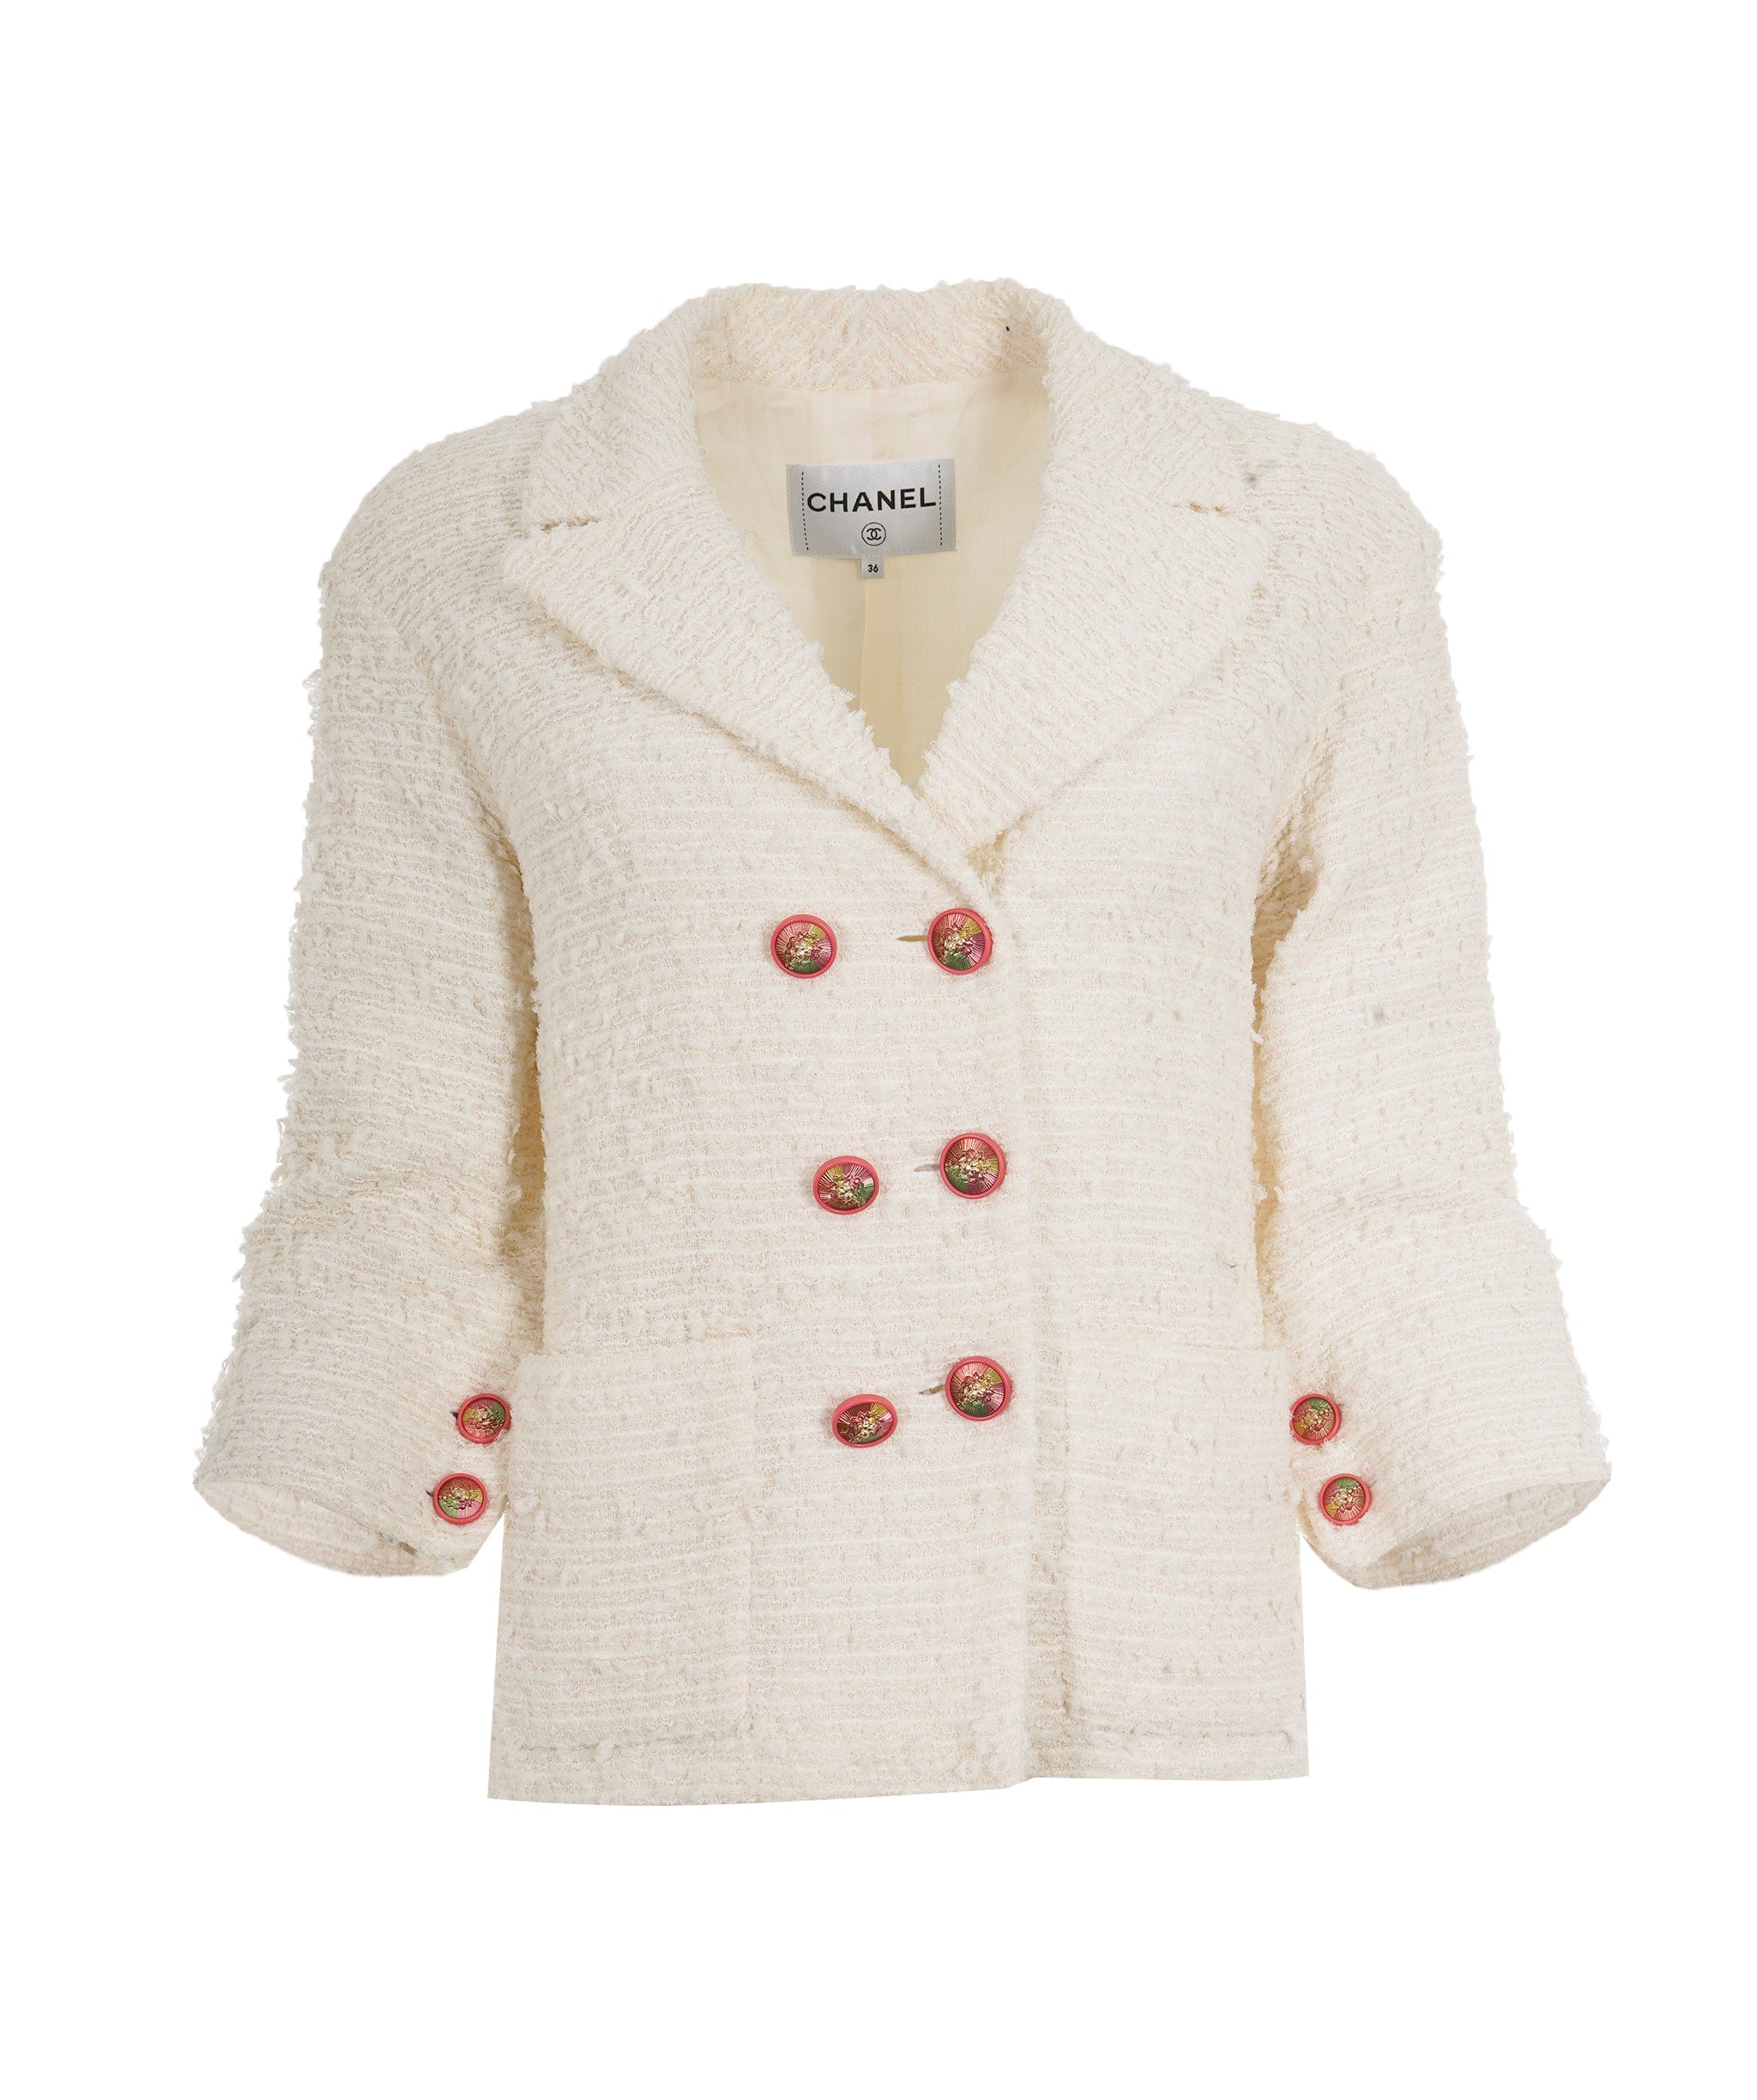 Chanel Chanel white tweed jacket pink buttons FR36 P56016V29319 AVC1965